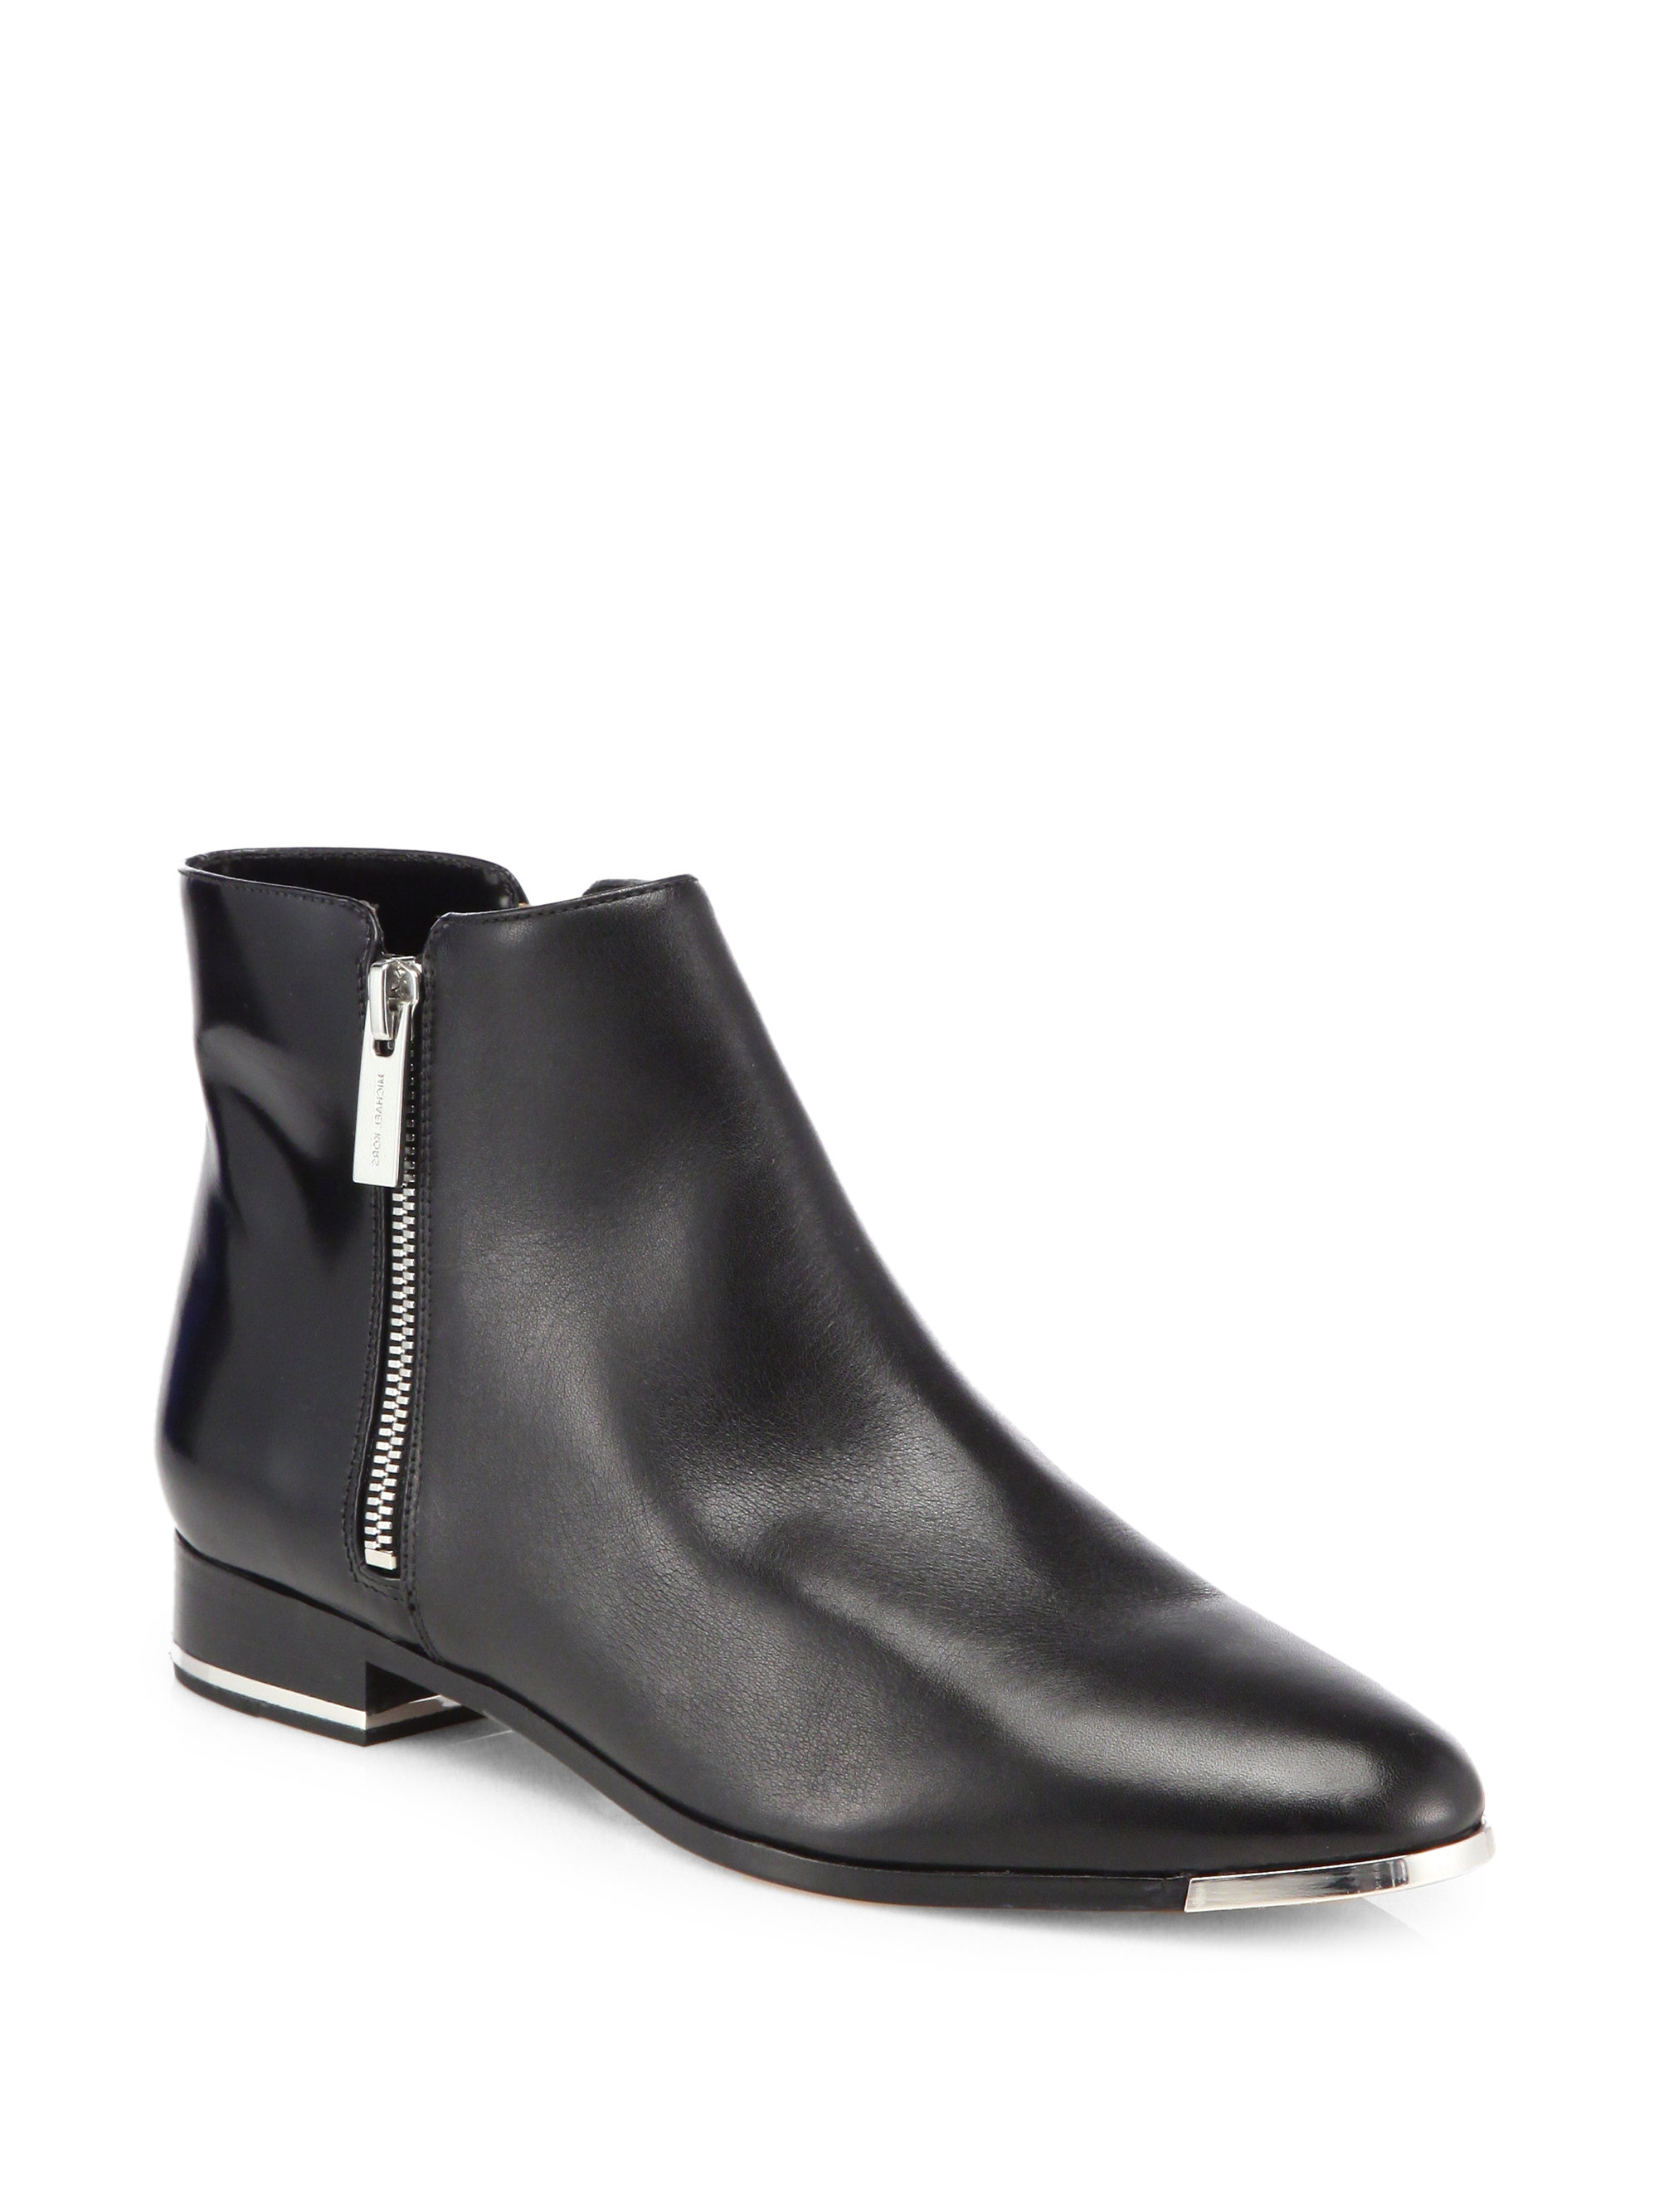 Michael Kors Cindra Leather Chelsea Boots in Black | Lyst